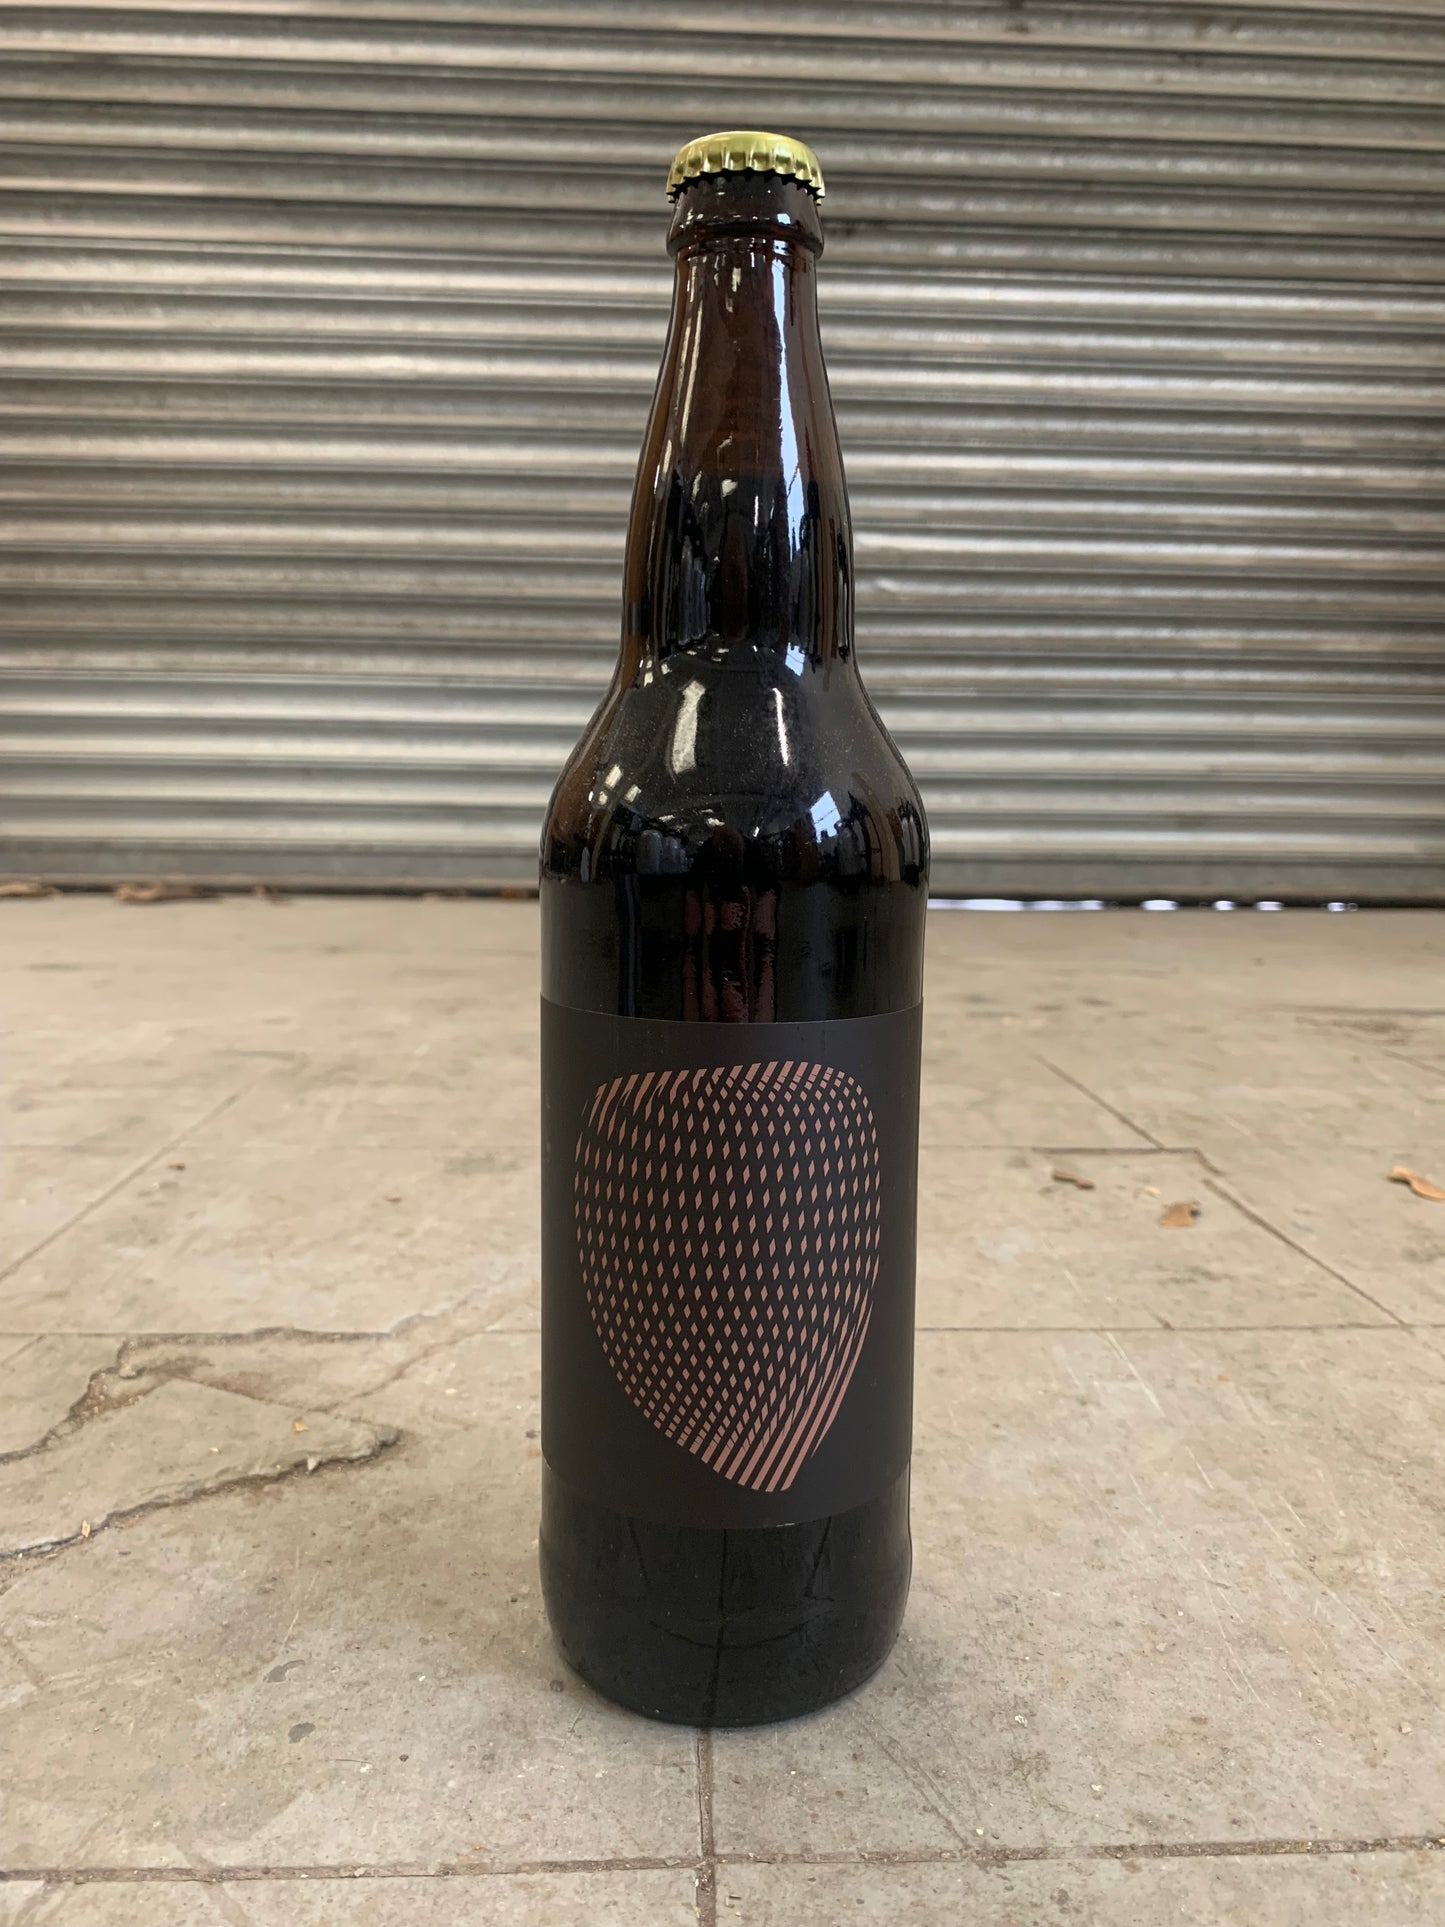 Cycle - Barrel Aged Hazelnut Imperial Stout with Cocoa Nibs